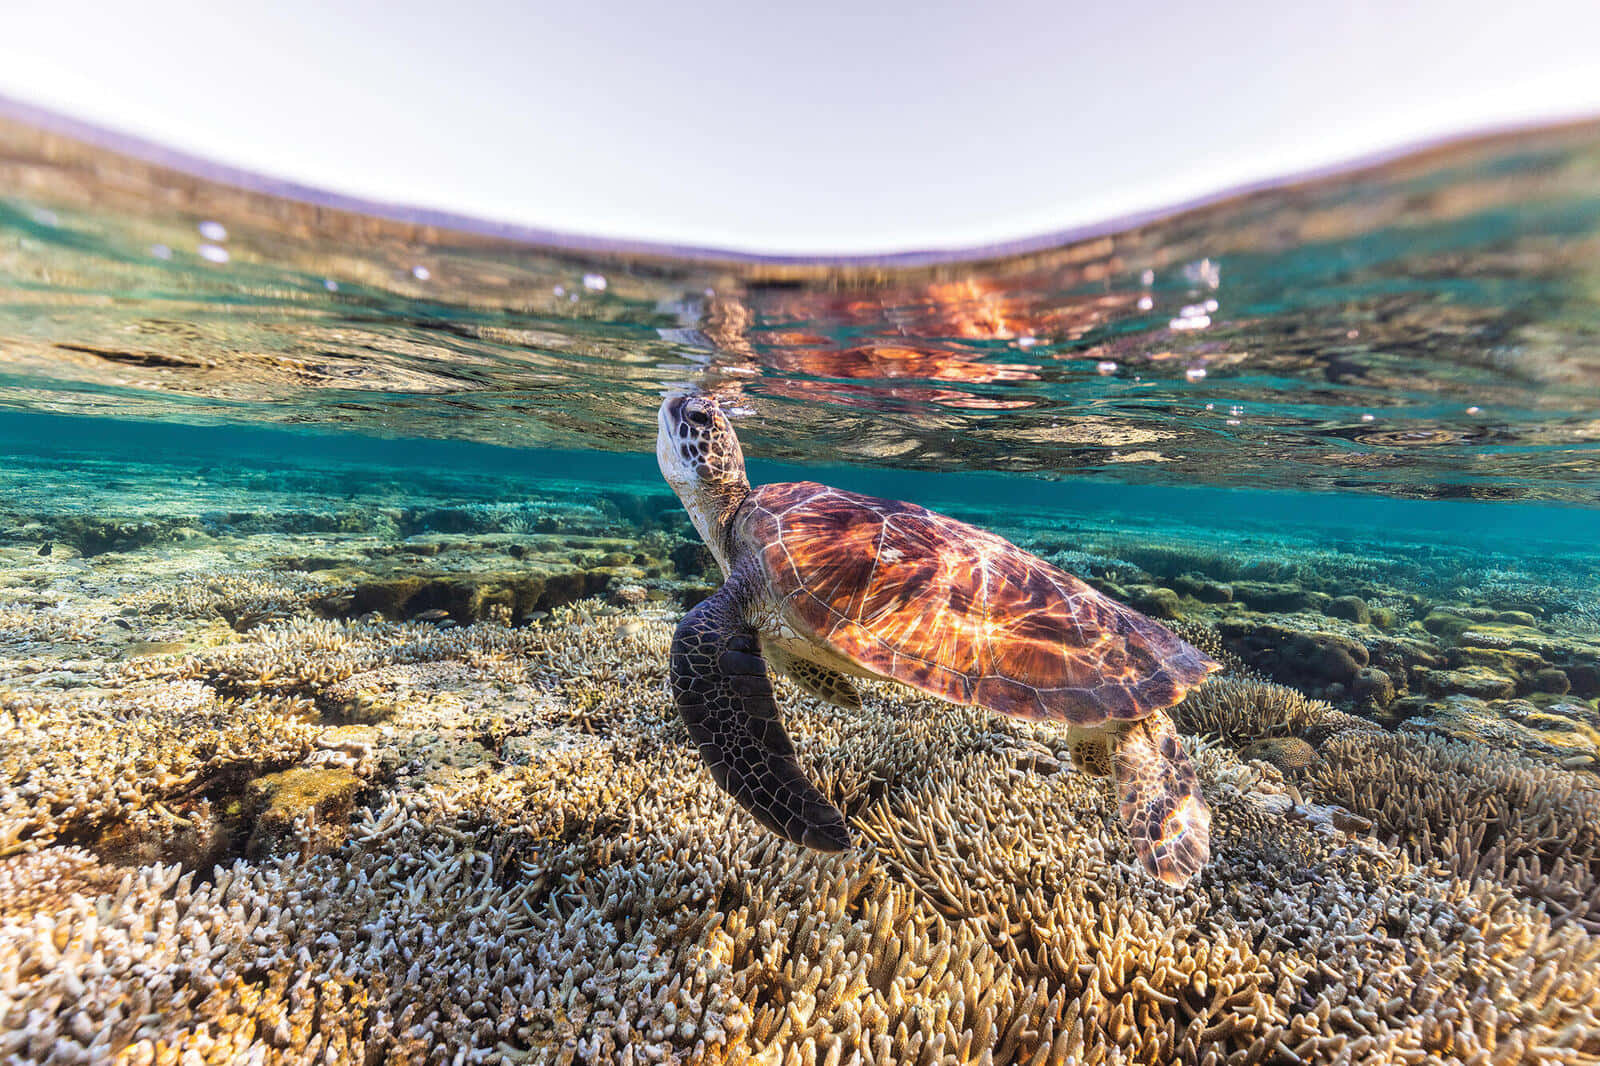 Kemps Ridley Sea Turtle Over Coral Reef Wallpaper